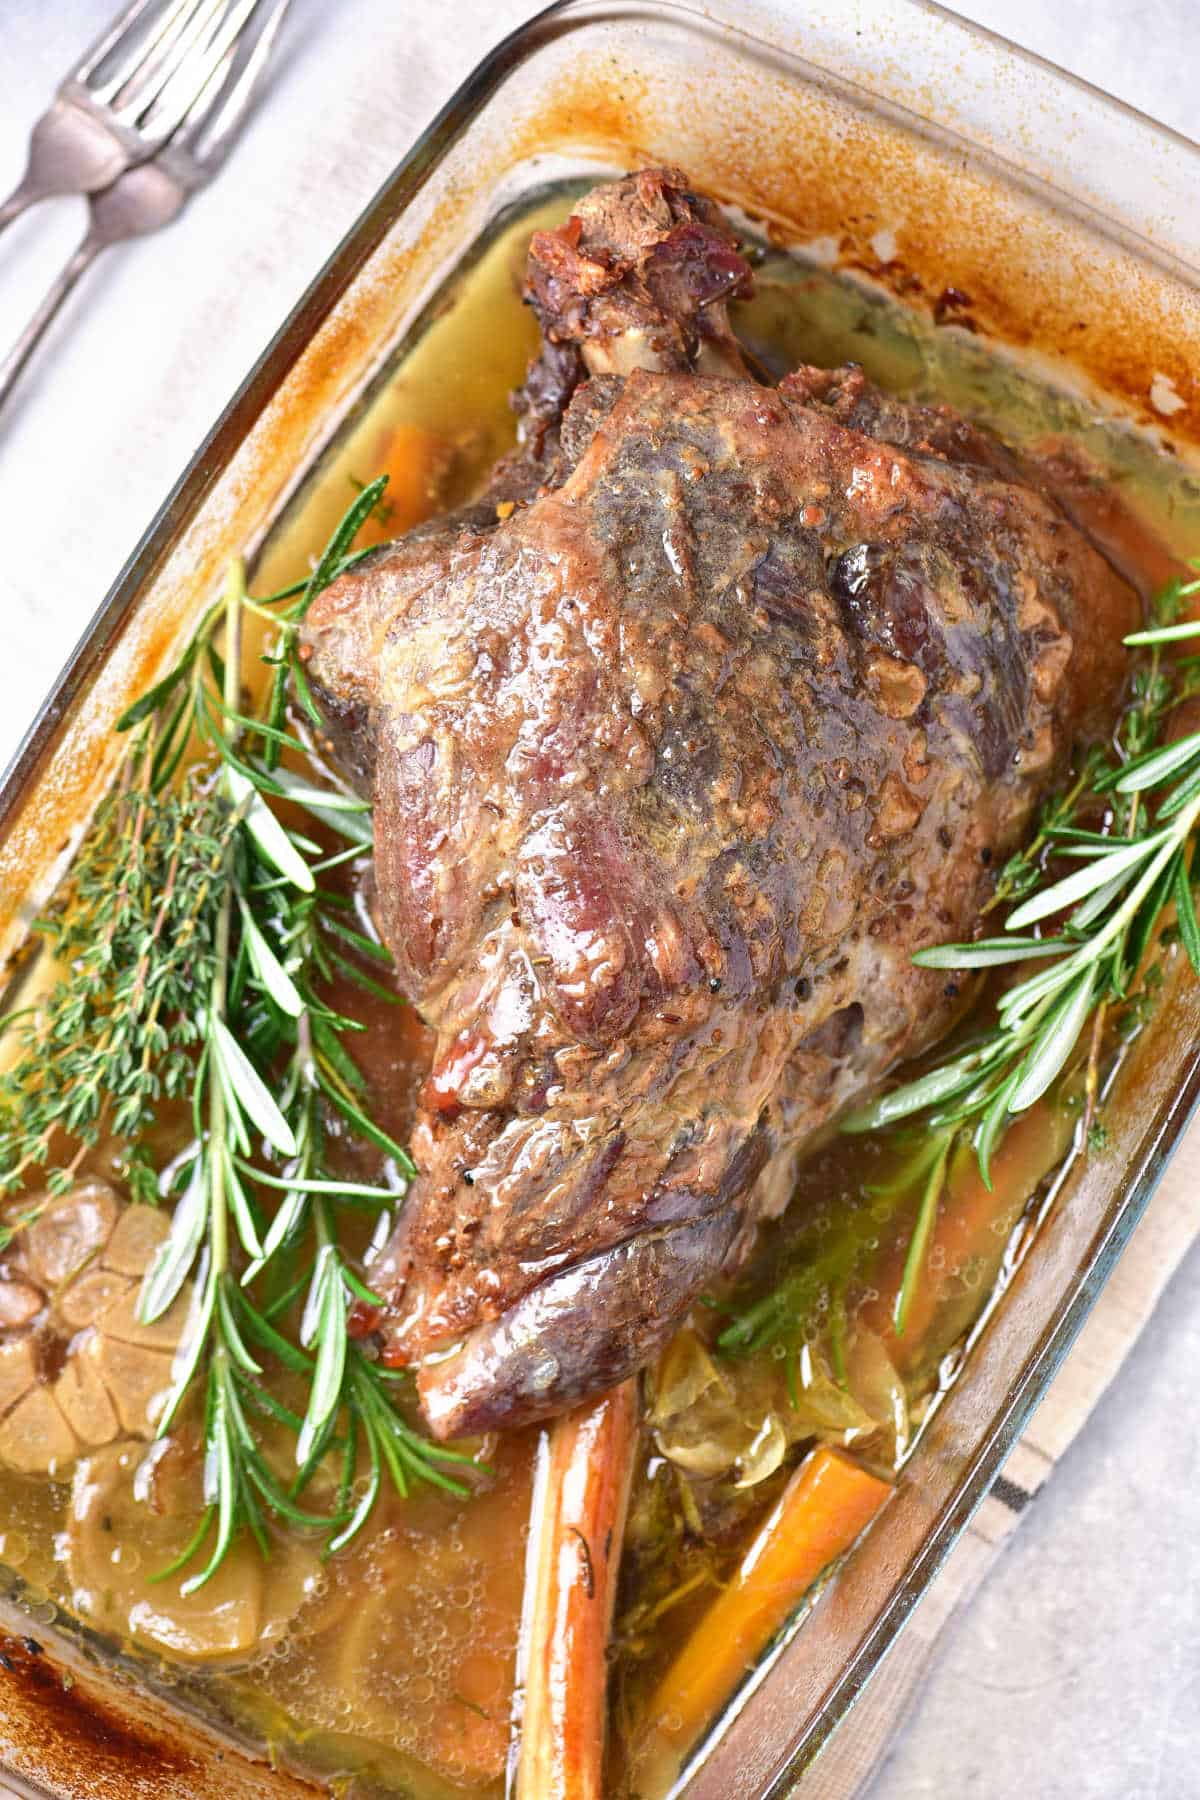 Fresh herbs around a juicy roasted leg of lamb in a glass dish.